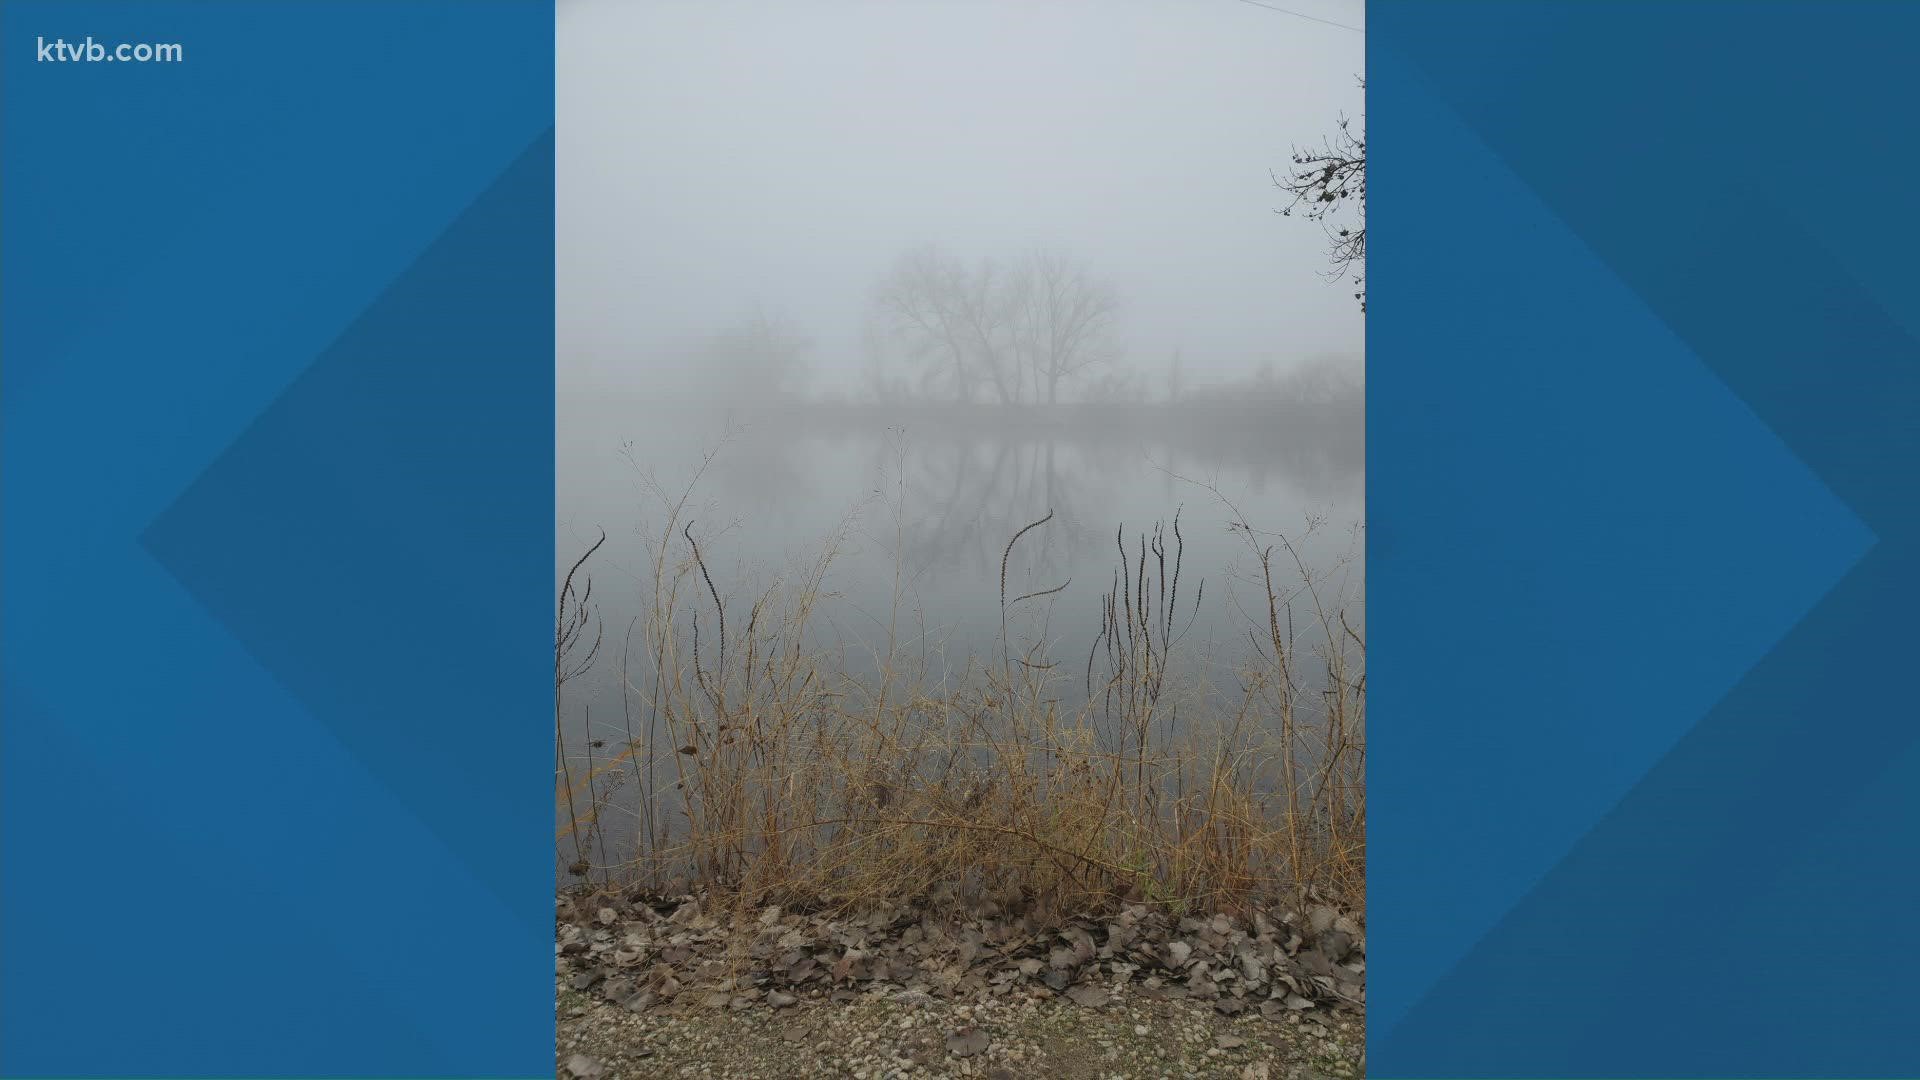 Caldwell and Nampa will still see a thick fog well into the afternoon. A dense fog advisory will be in effect for the lower Treasure Valley until Saturday evening.